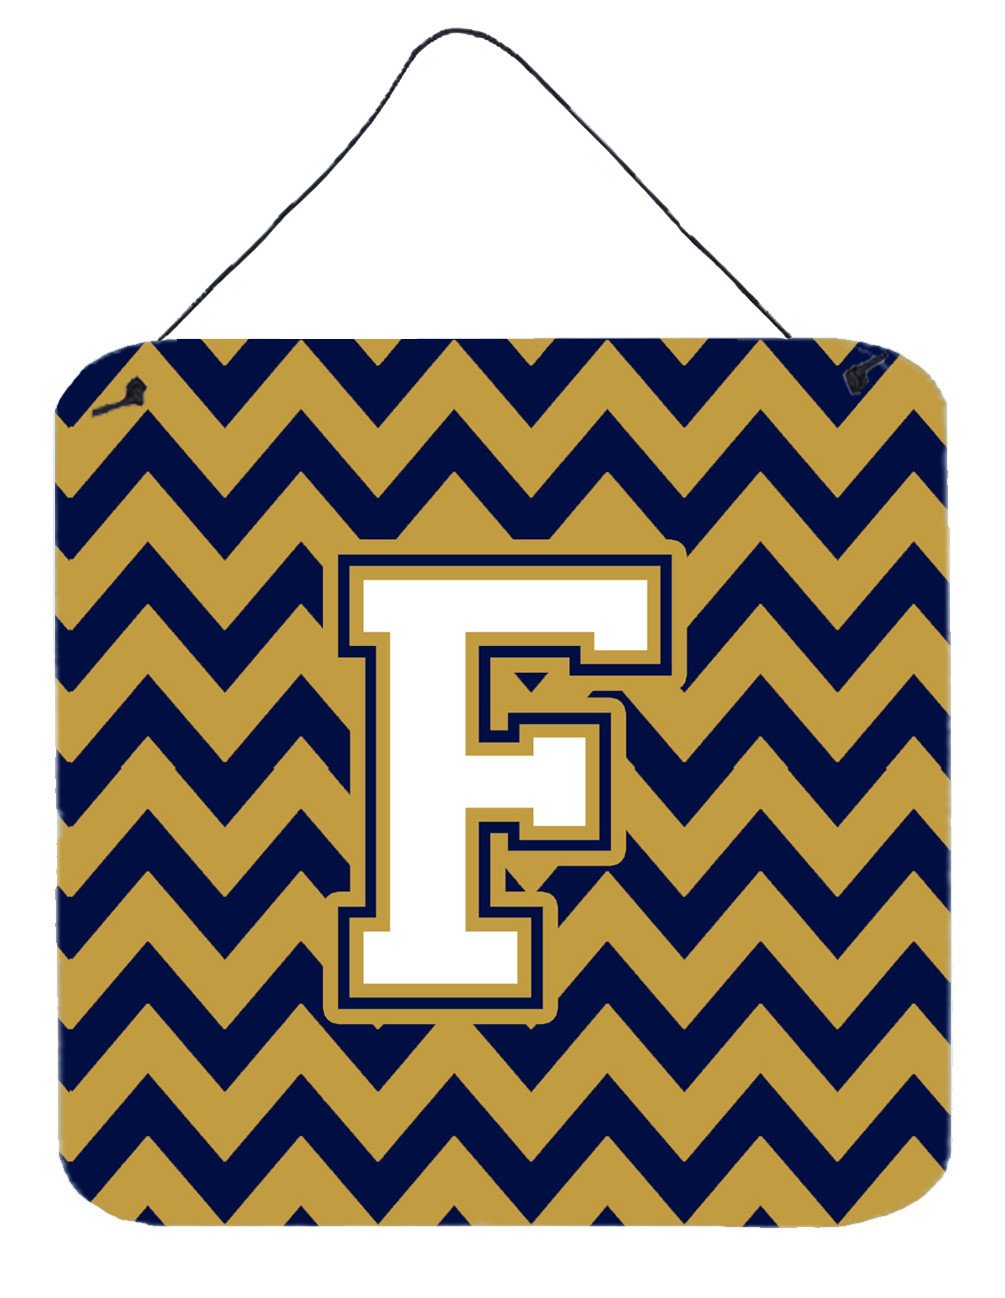 Letter F Chevron Navy Blue and Gold Wall or Door Hanging Prints CJ1057-FDS66 by Caroline's Treasures